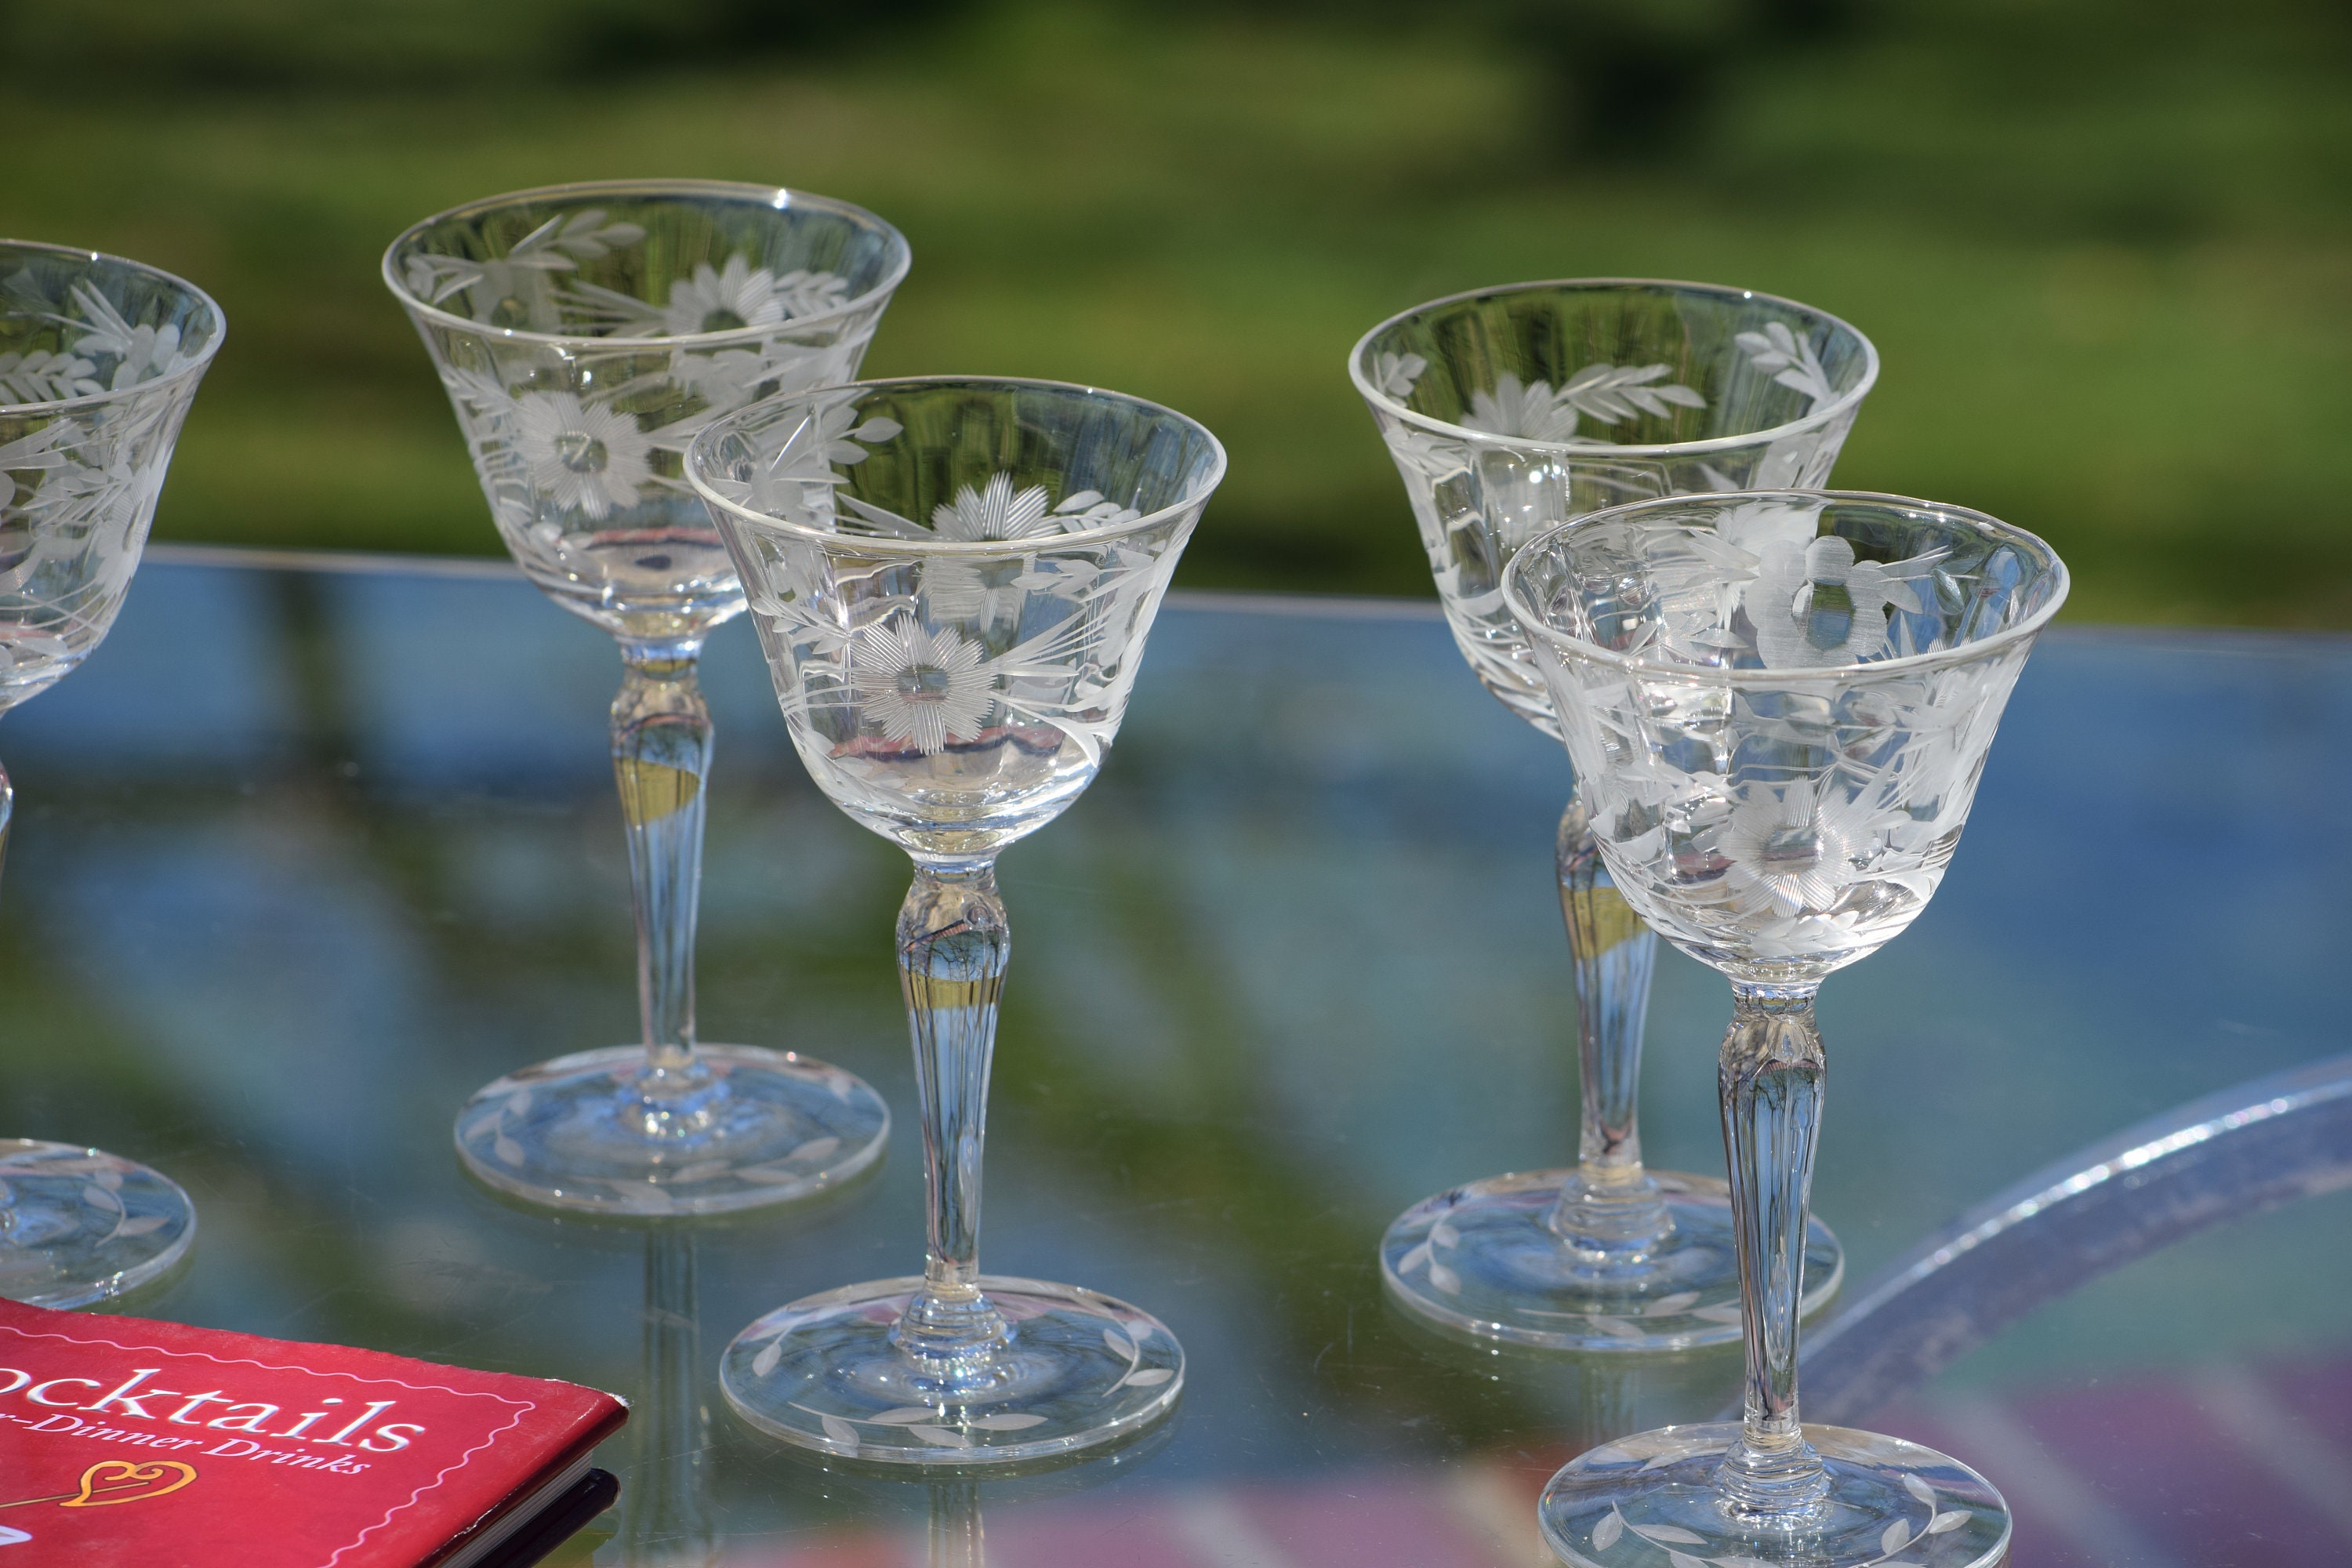 Vintage Etched Crystal Martini Glasses, Cordial Glasses, and Wine